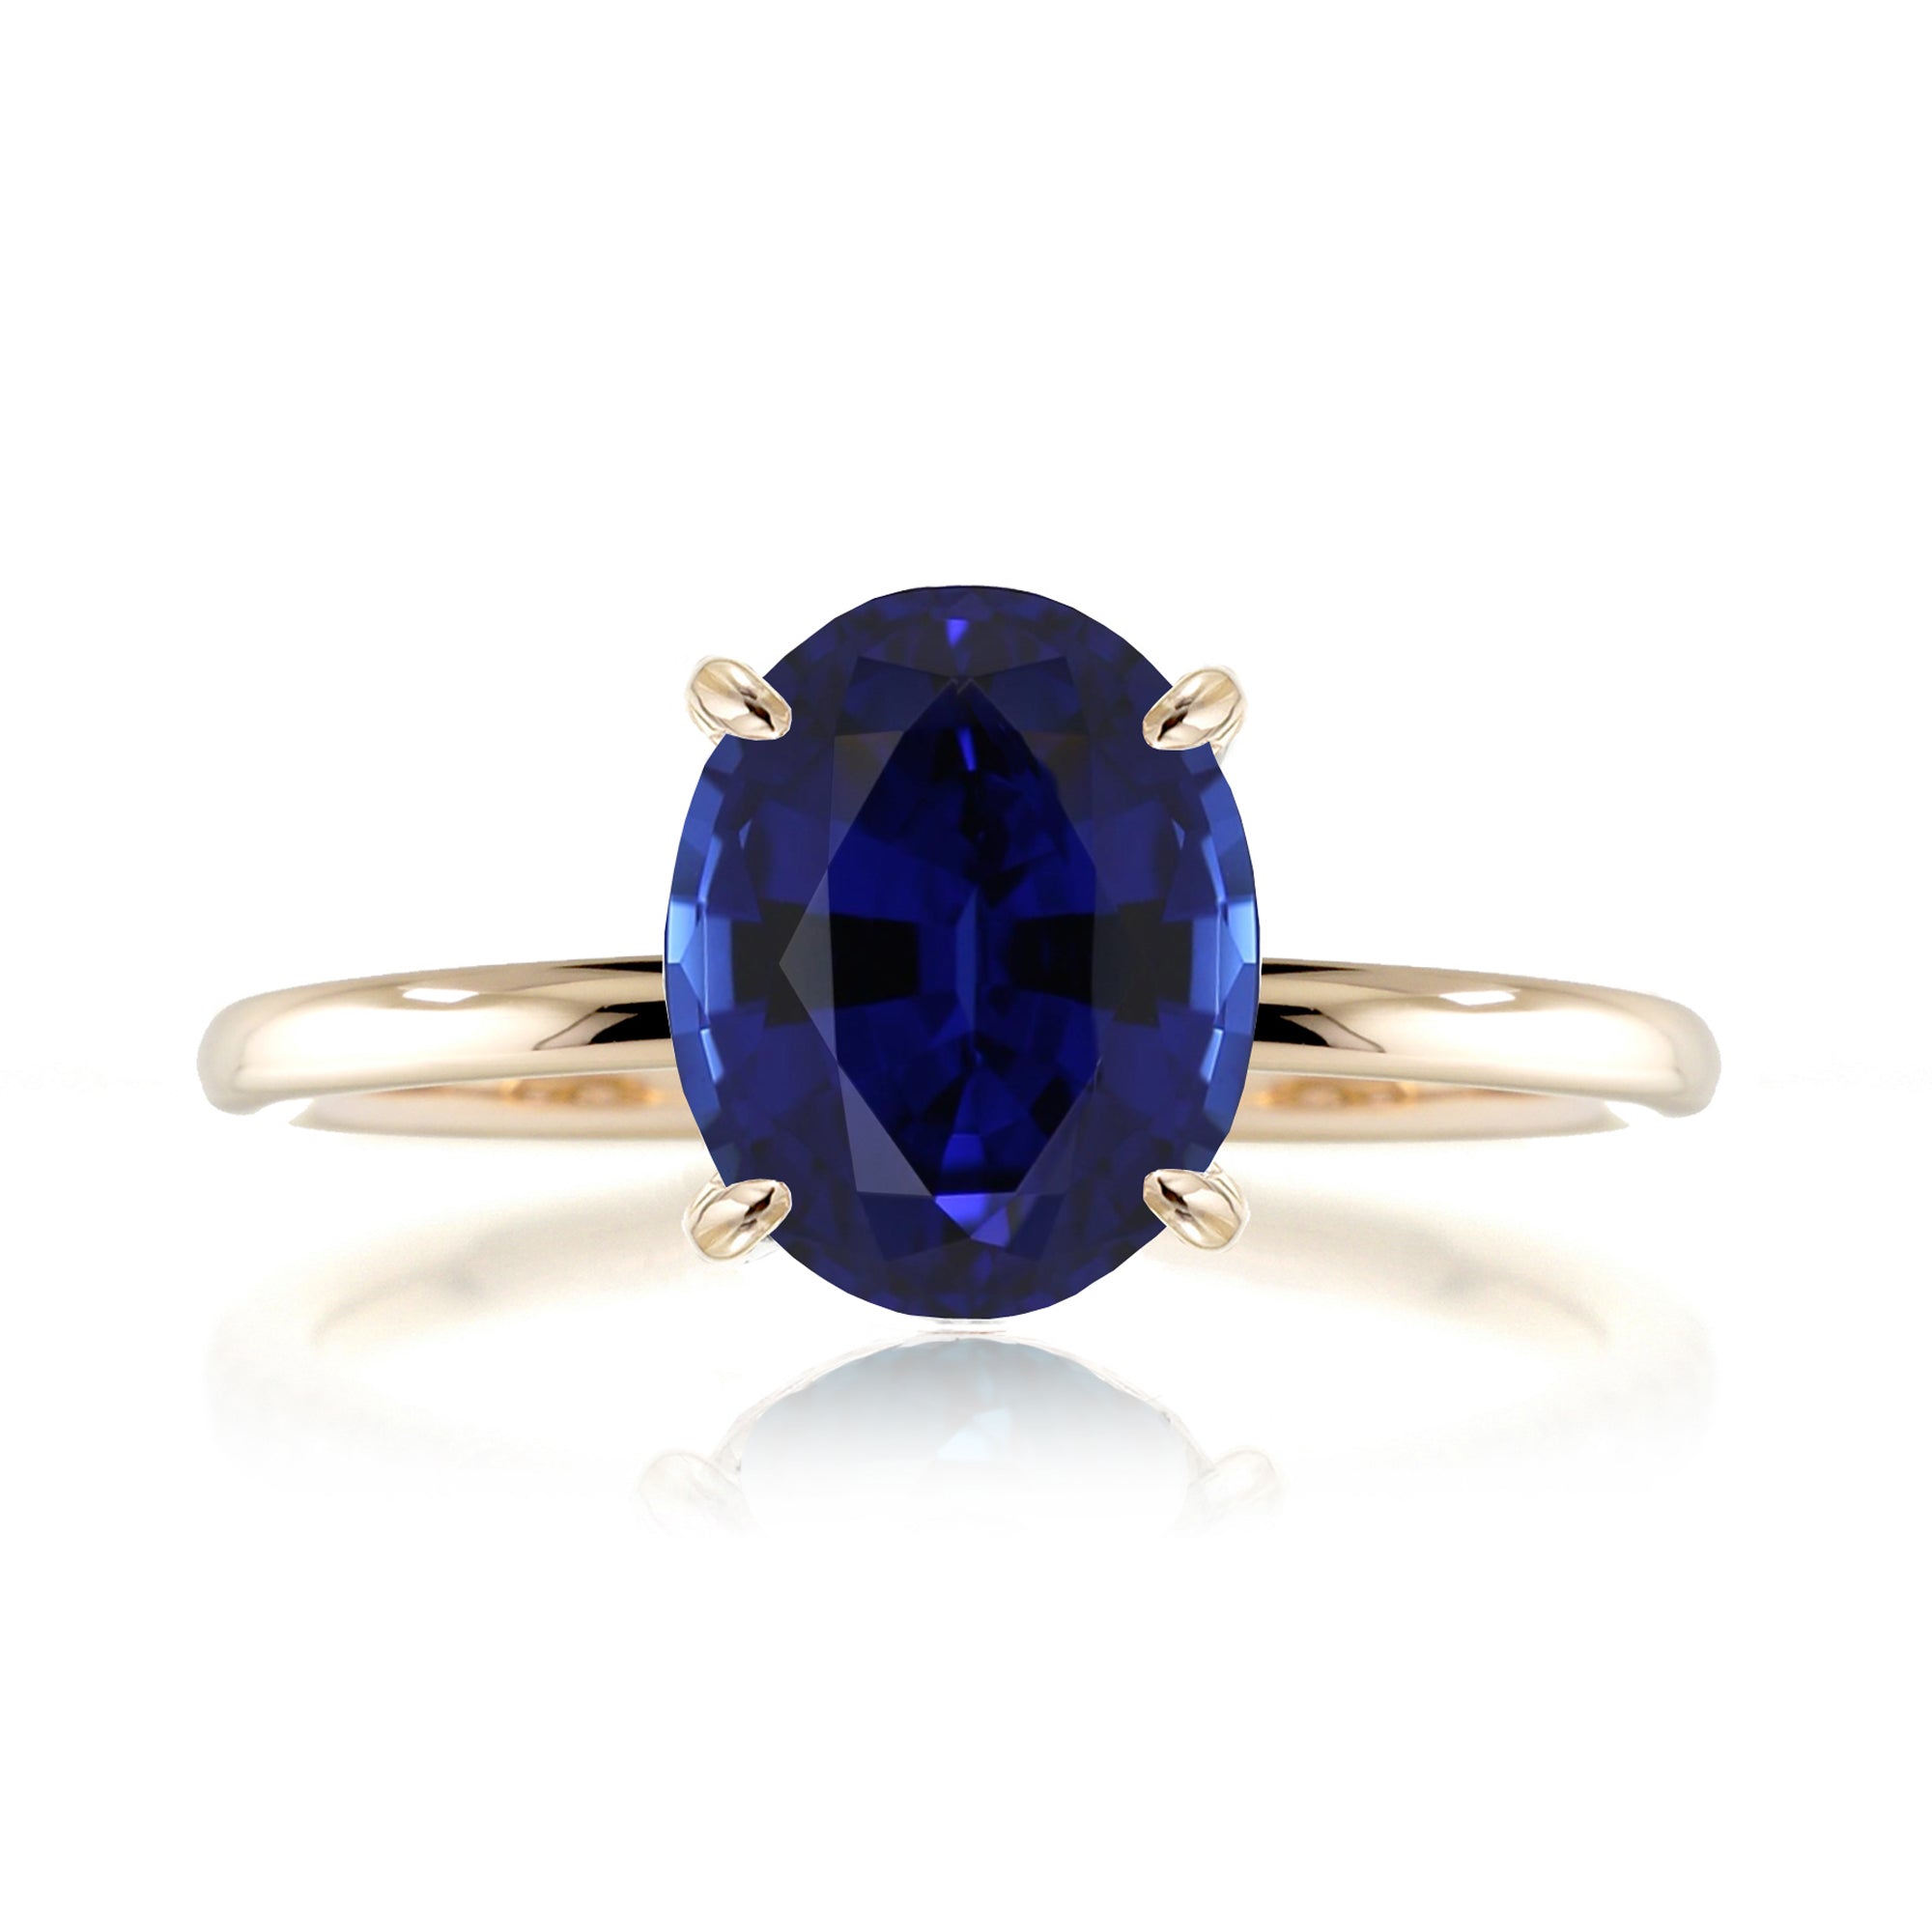 Oval blue sapphire solid band engagement ring yellow gold - the Ava